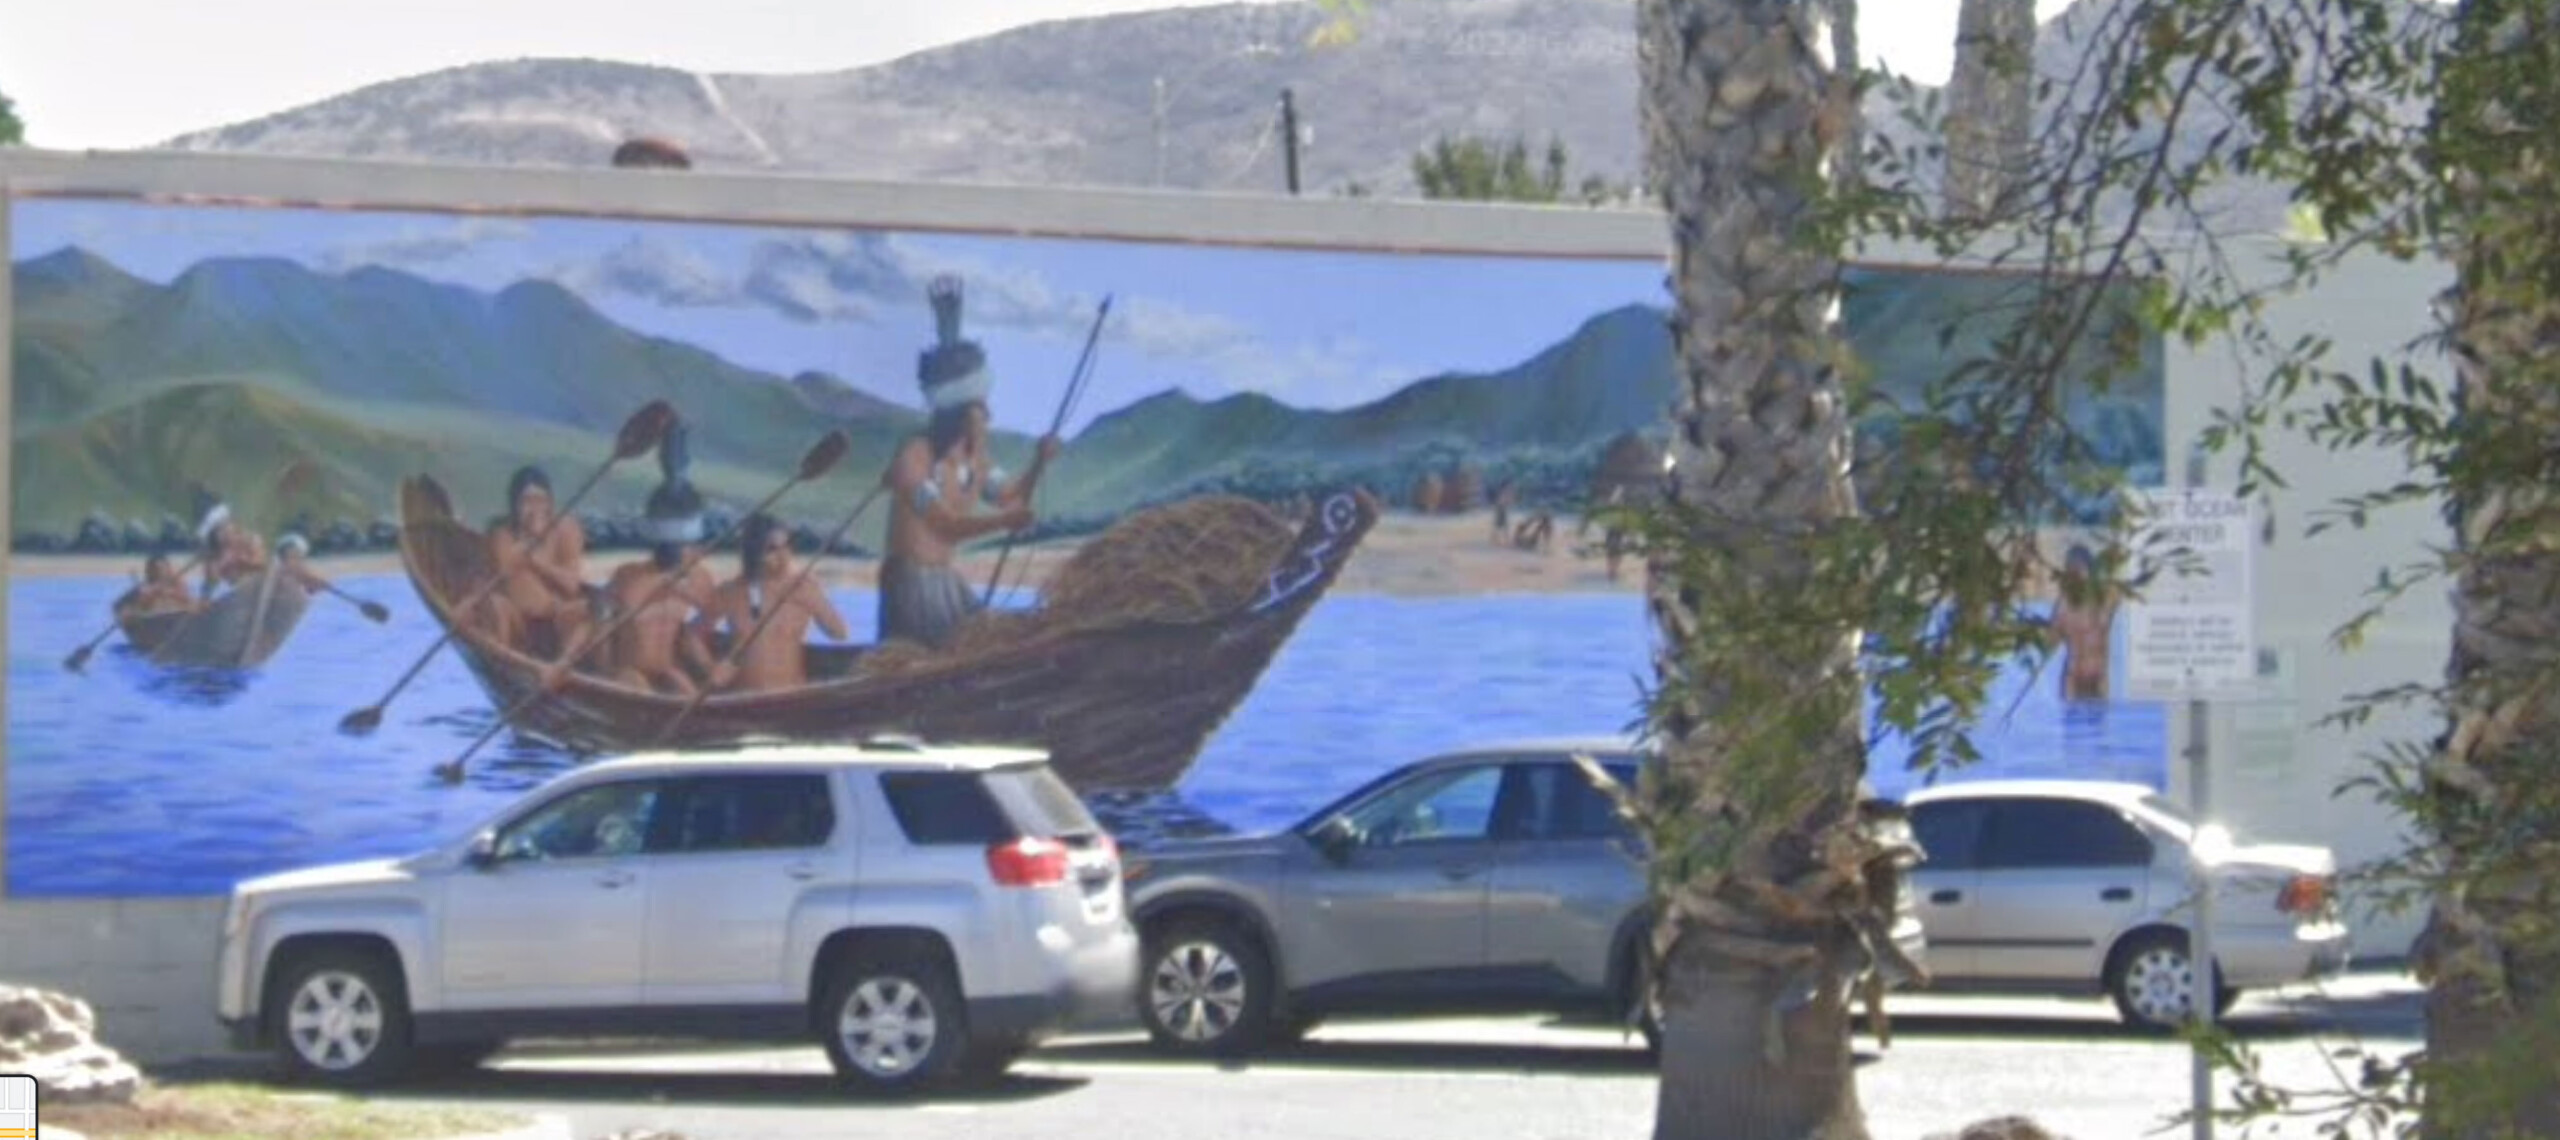 Lompoc Mural - Chumash Indians (1992) - Located at 126 E. Ocean Ave.